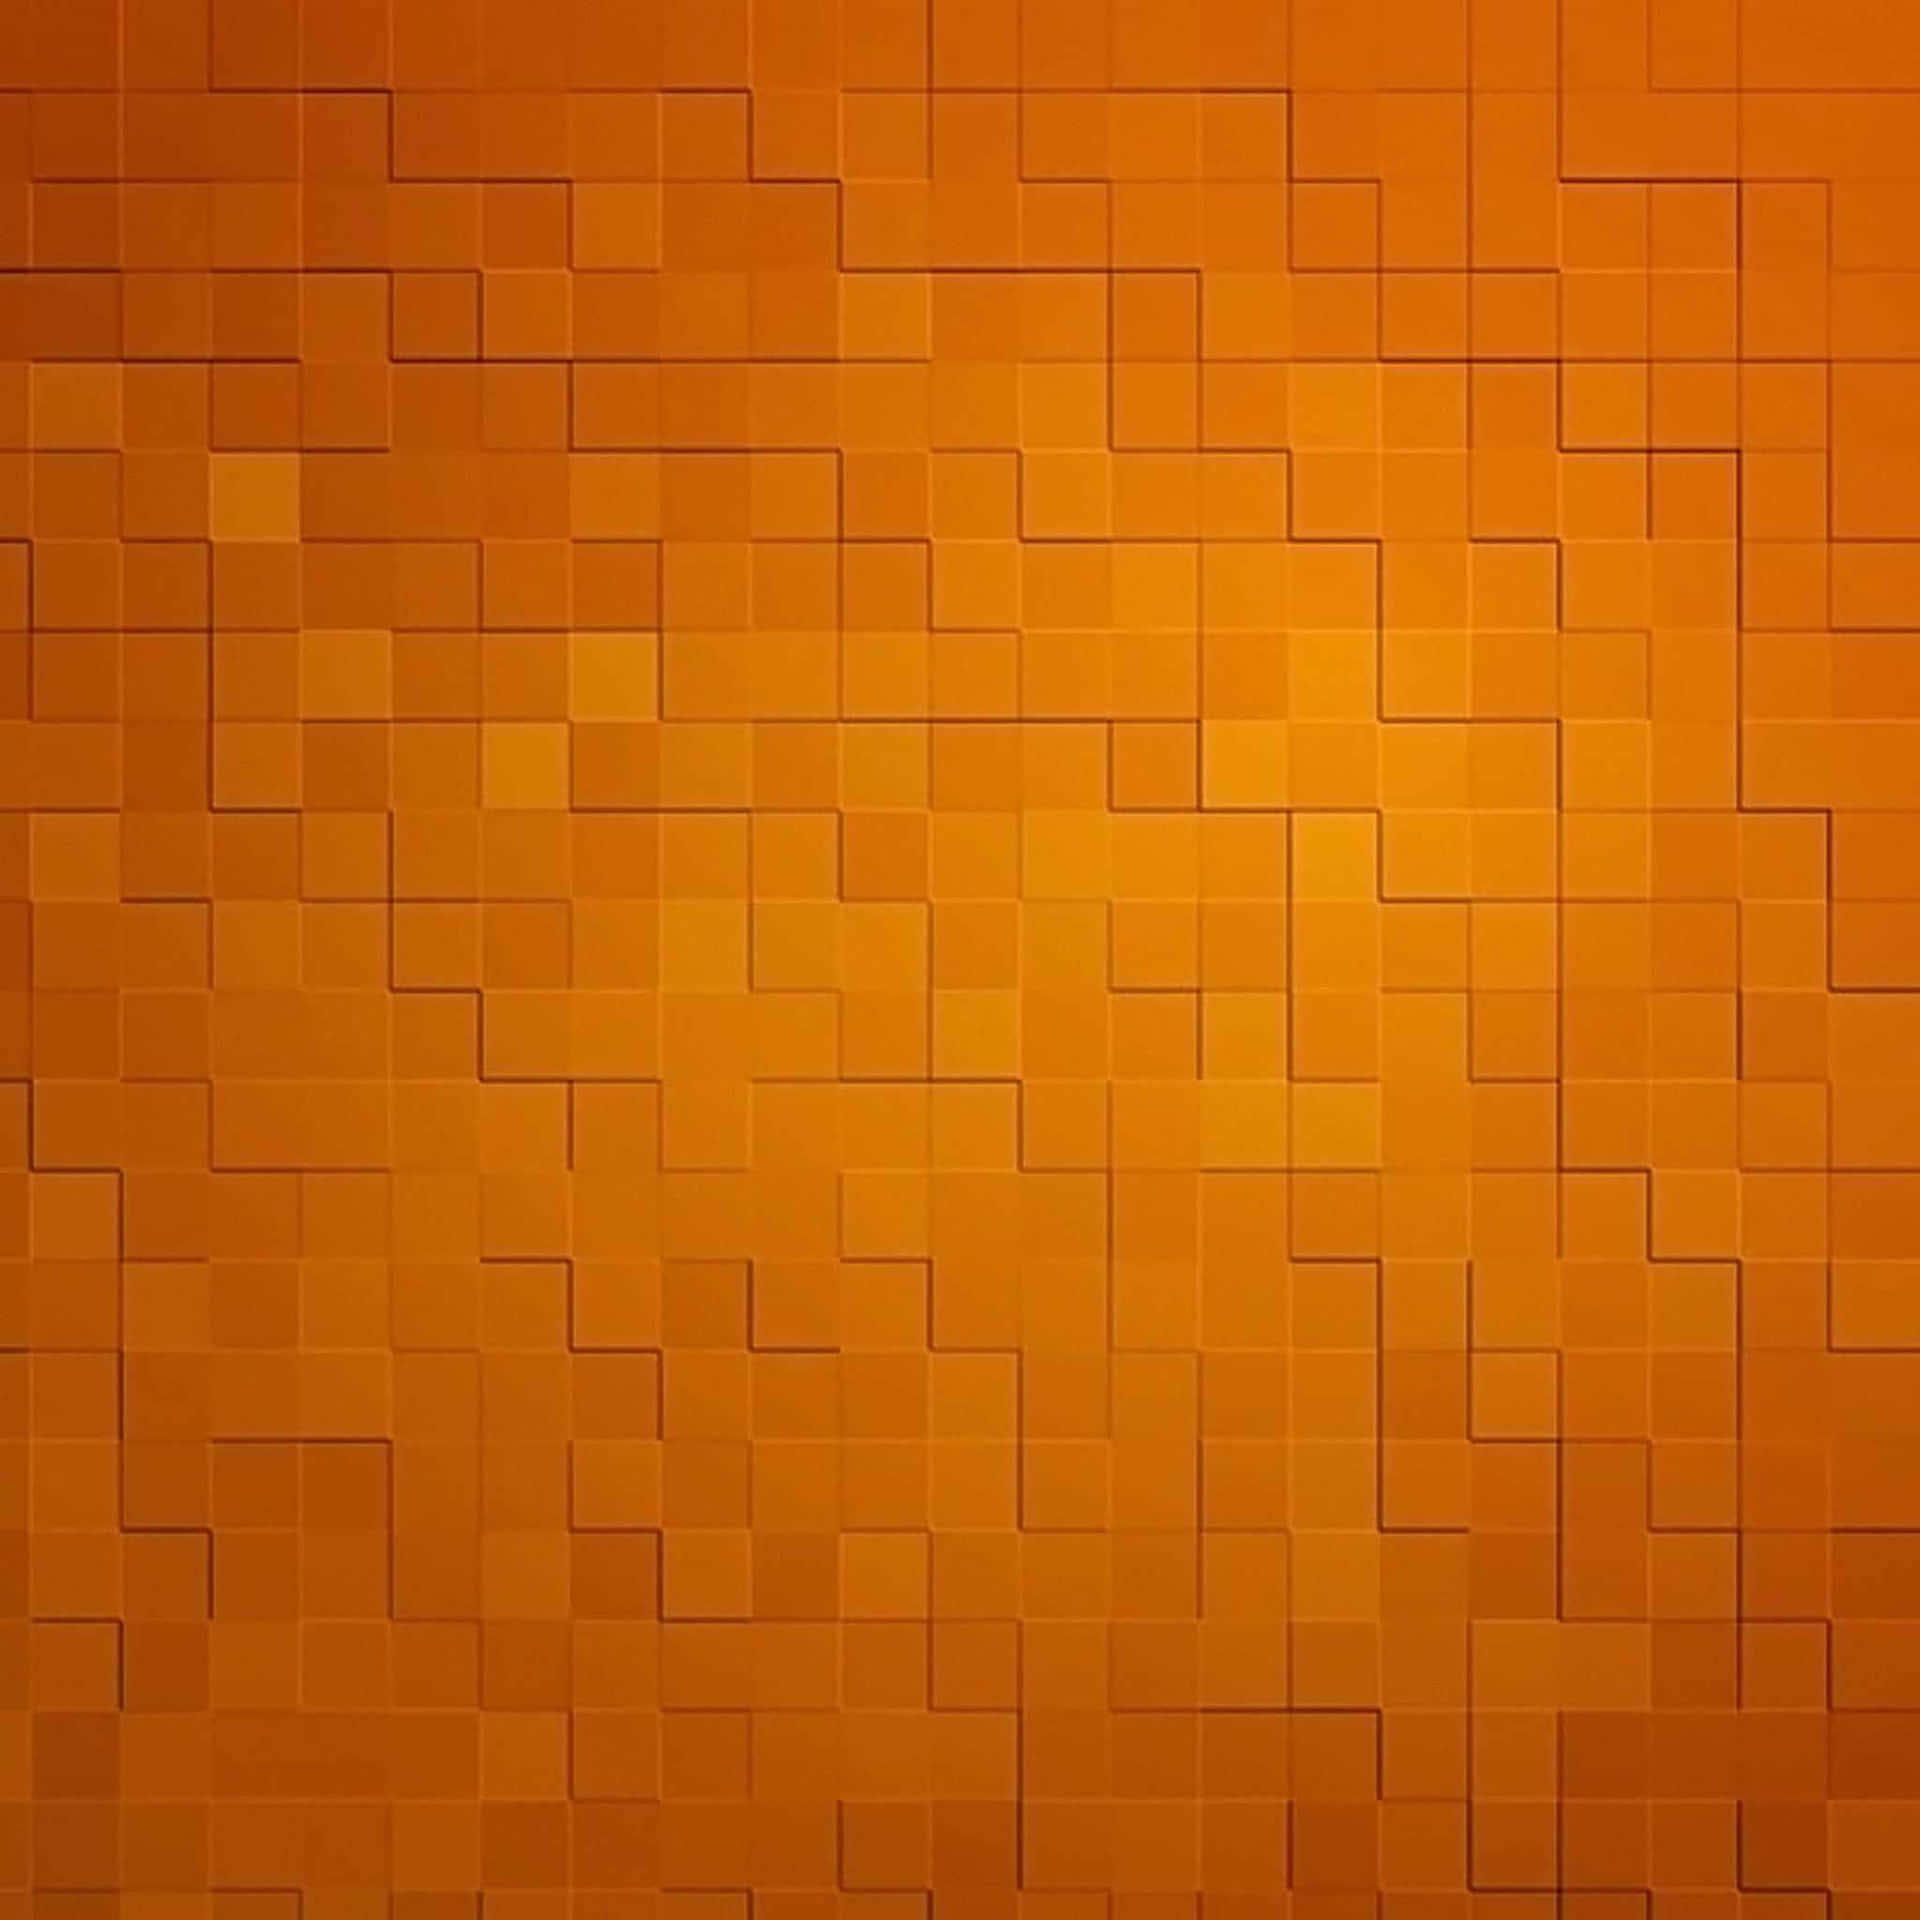 Abstract And Artistic Tile Background